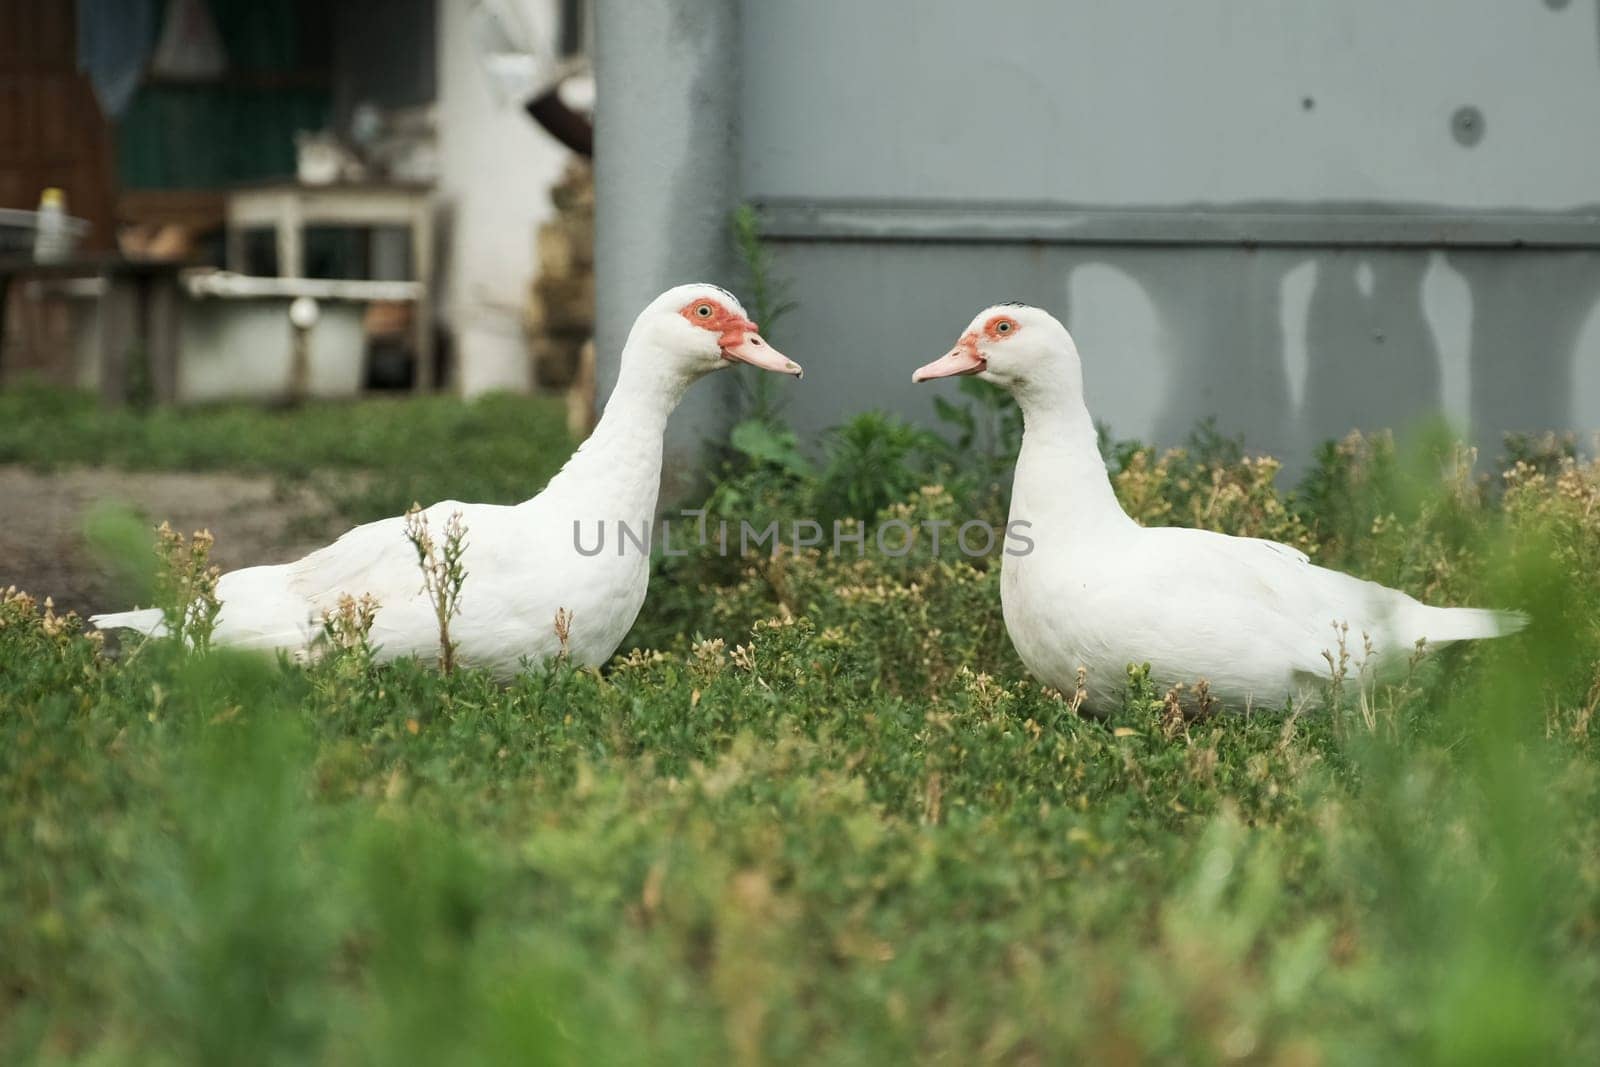 Two white big ducks with red eyes standing on the grass and looking at each other, rustic background